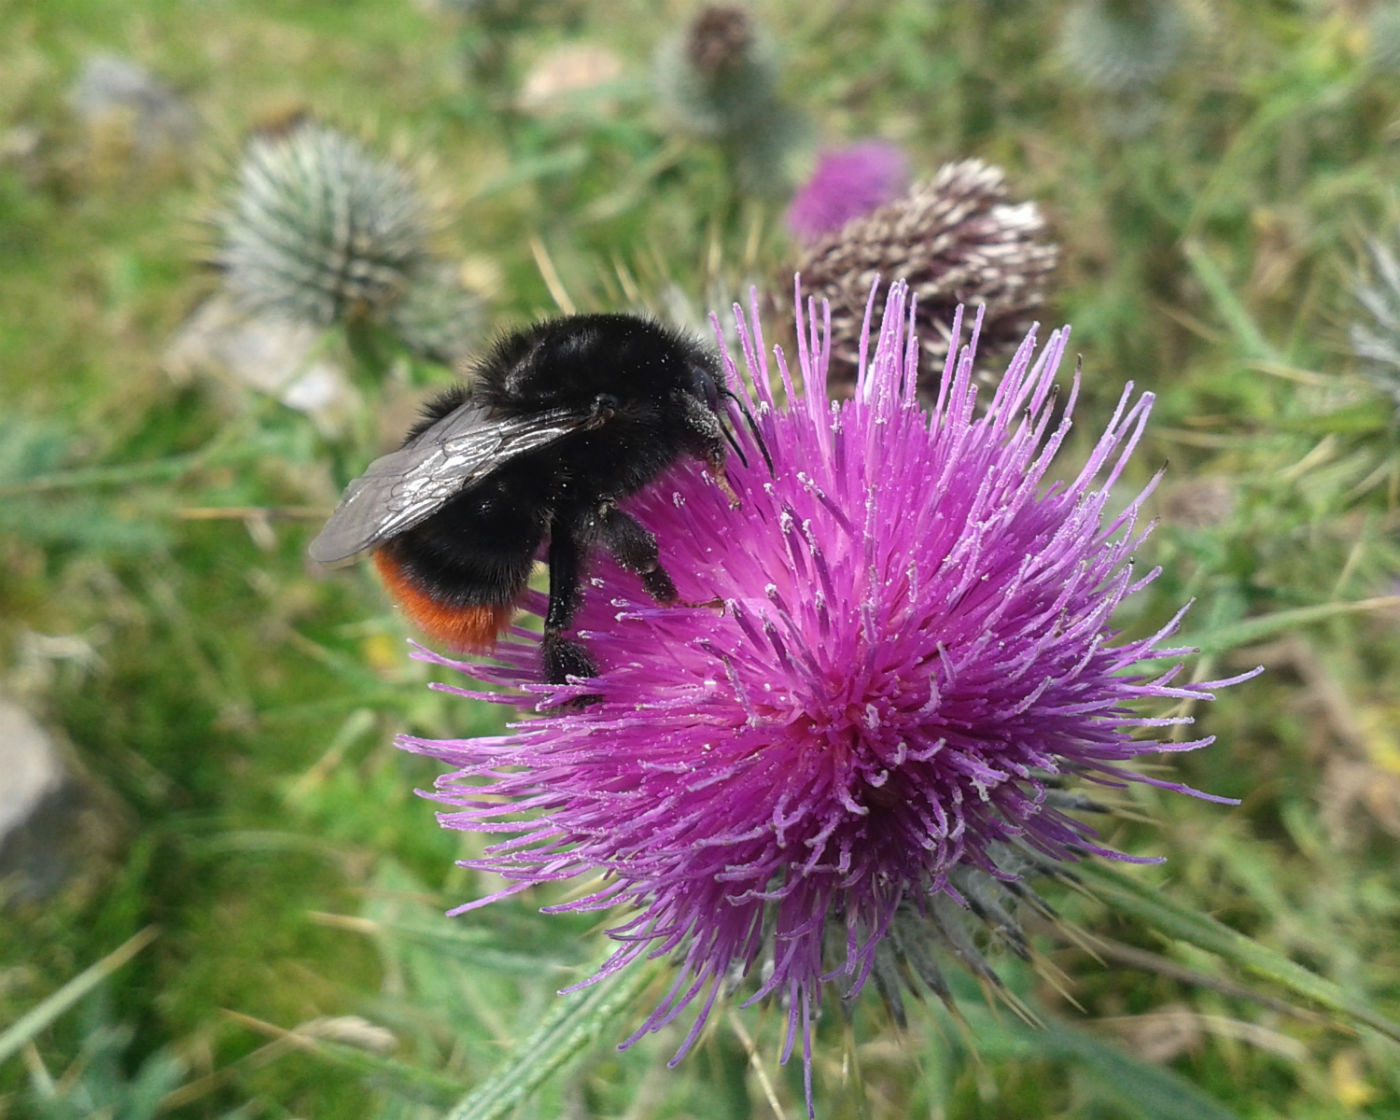 Red Tailed Bumblebee on top of a flower